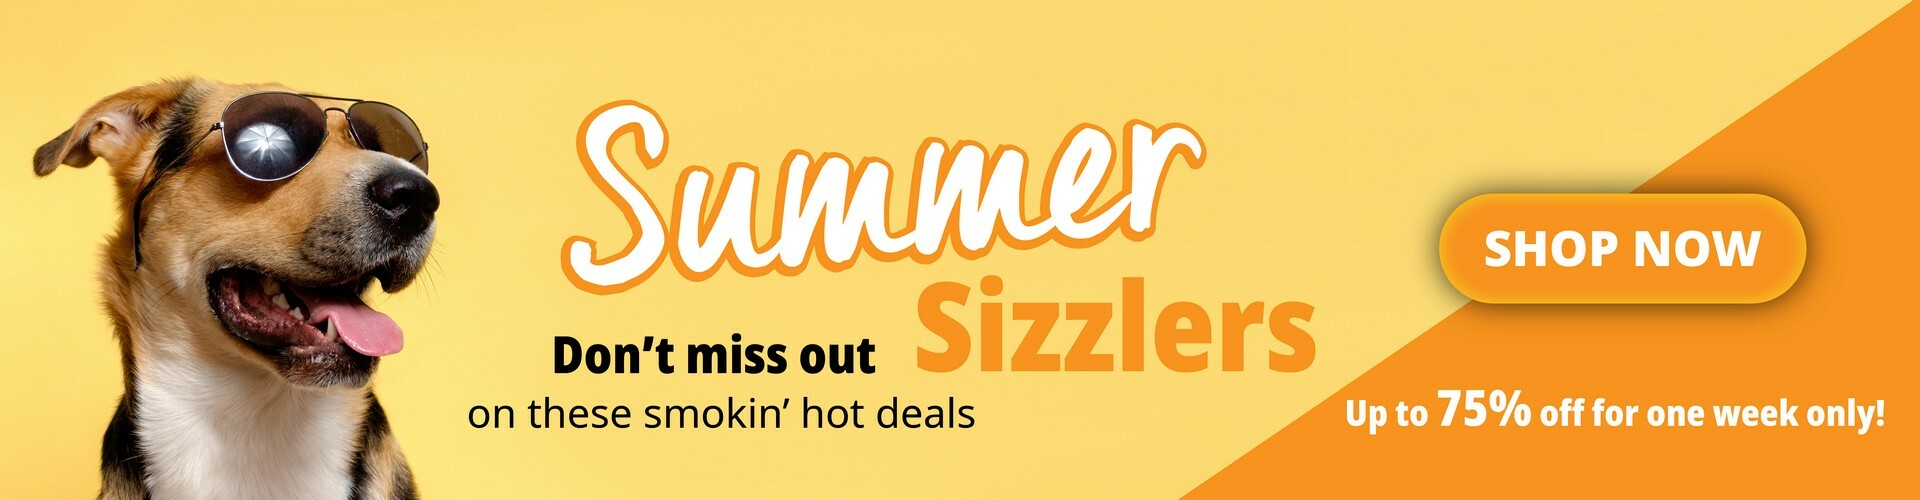 P6-Summer-Sizzlers